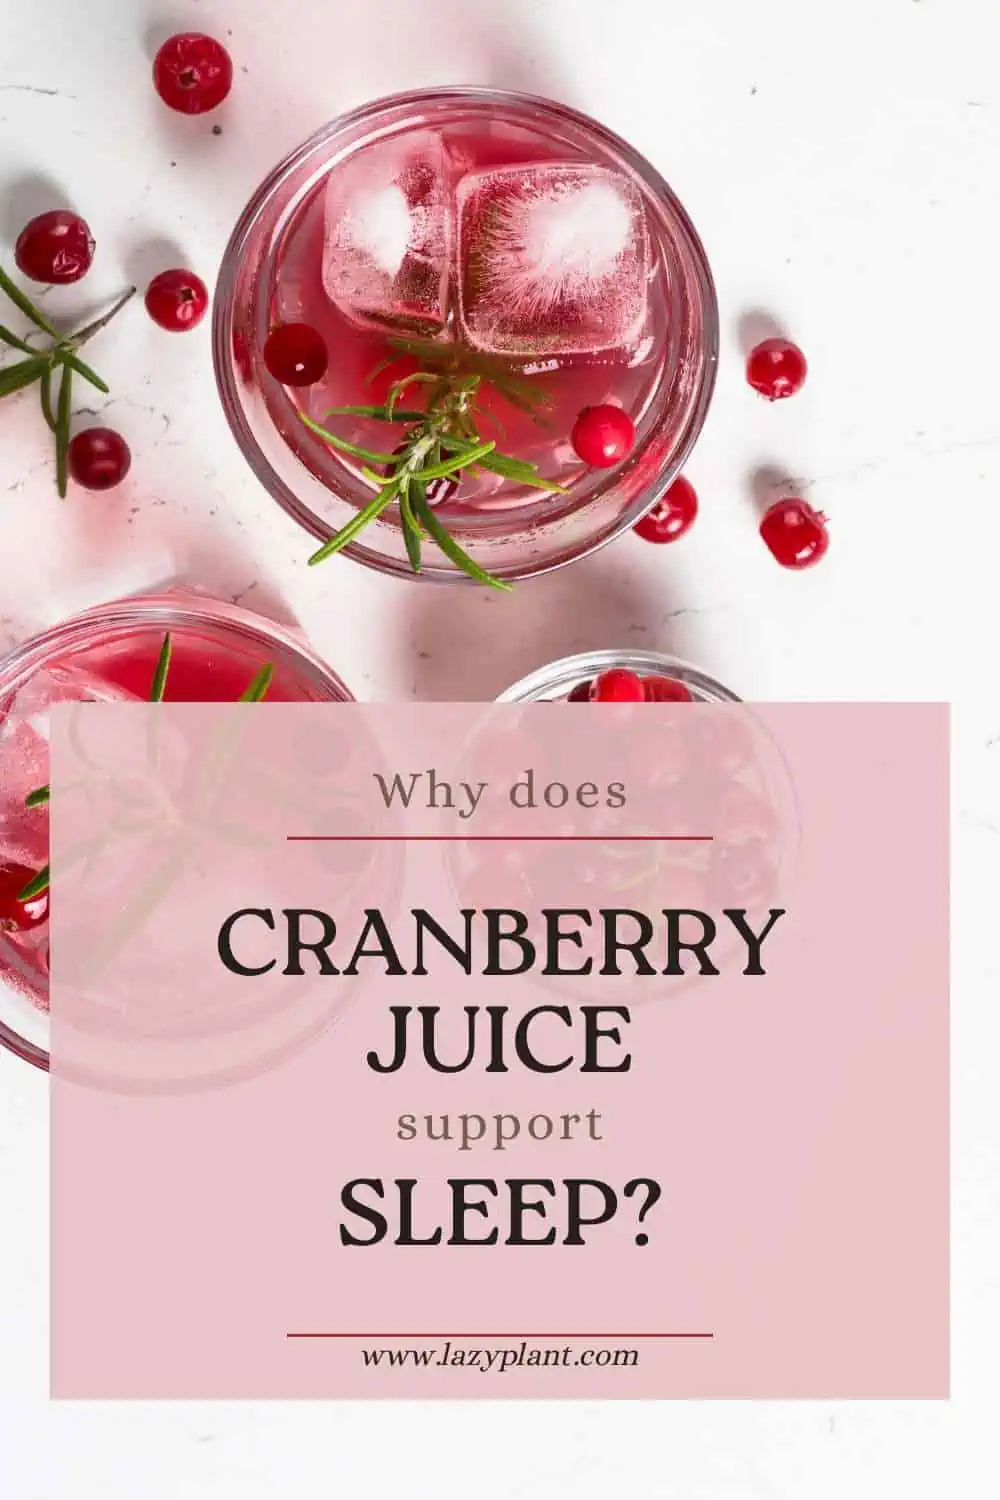 Why should I drink cranberry juice before bed?